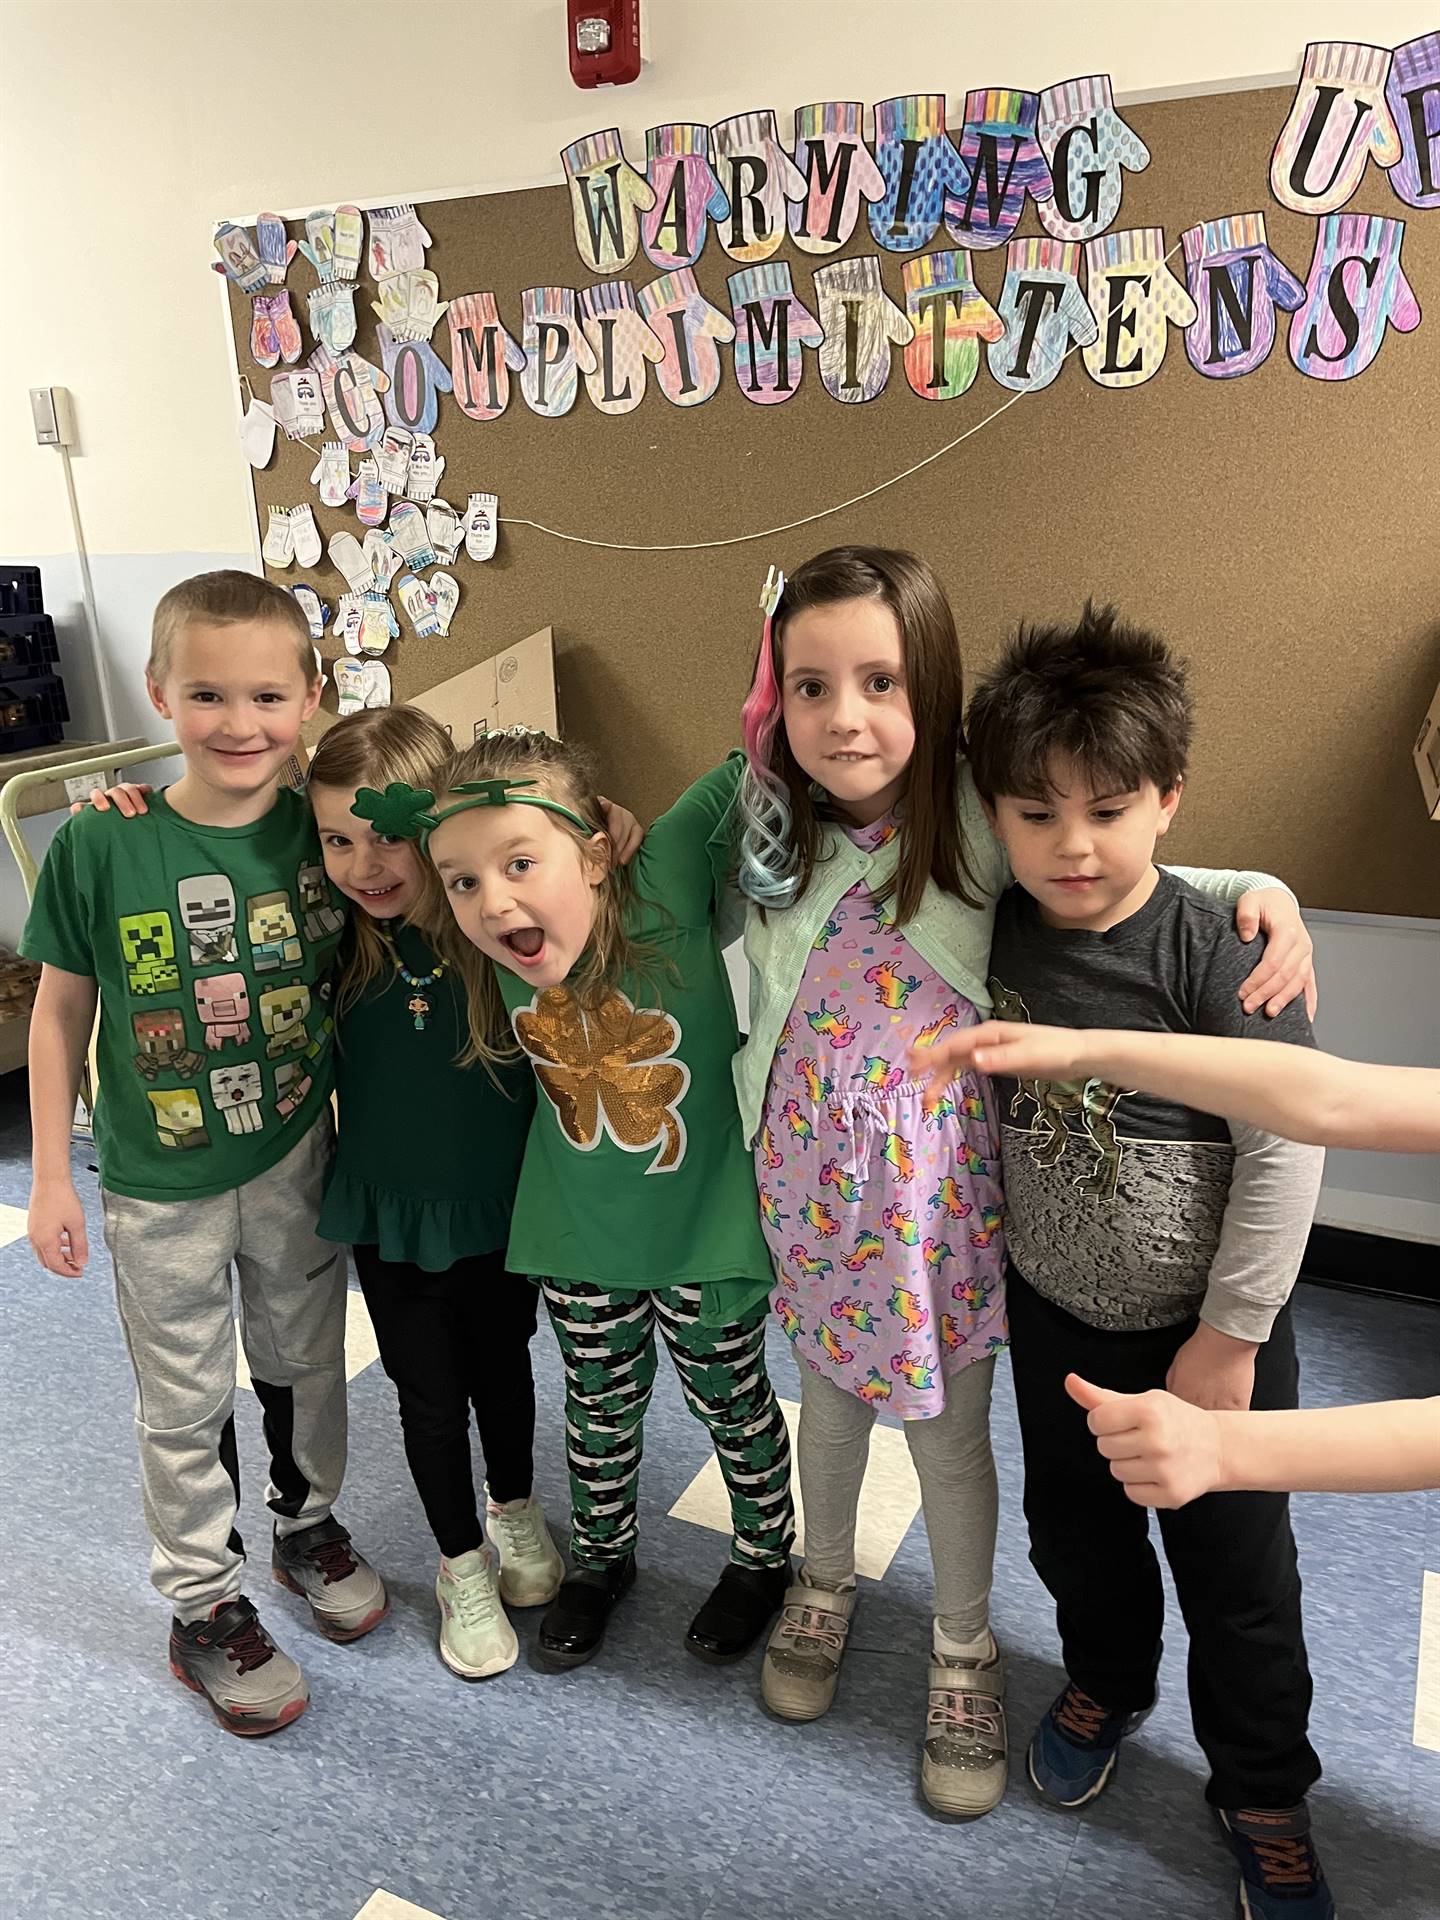 students in assorted dress including green shamrocks.